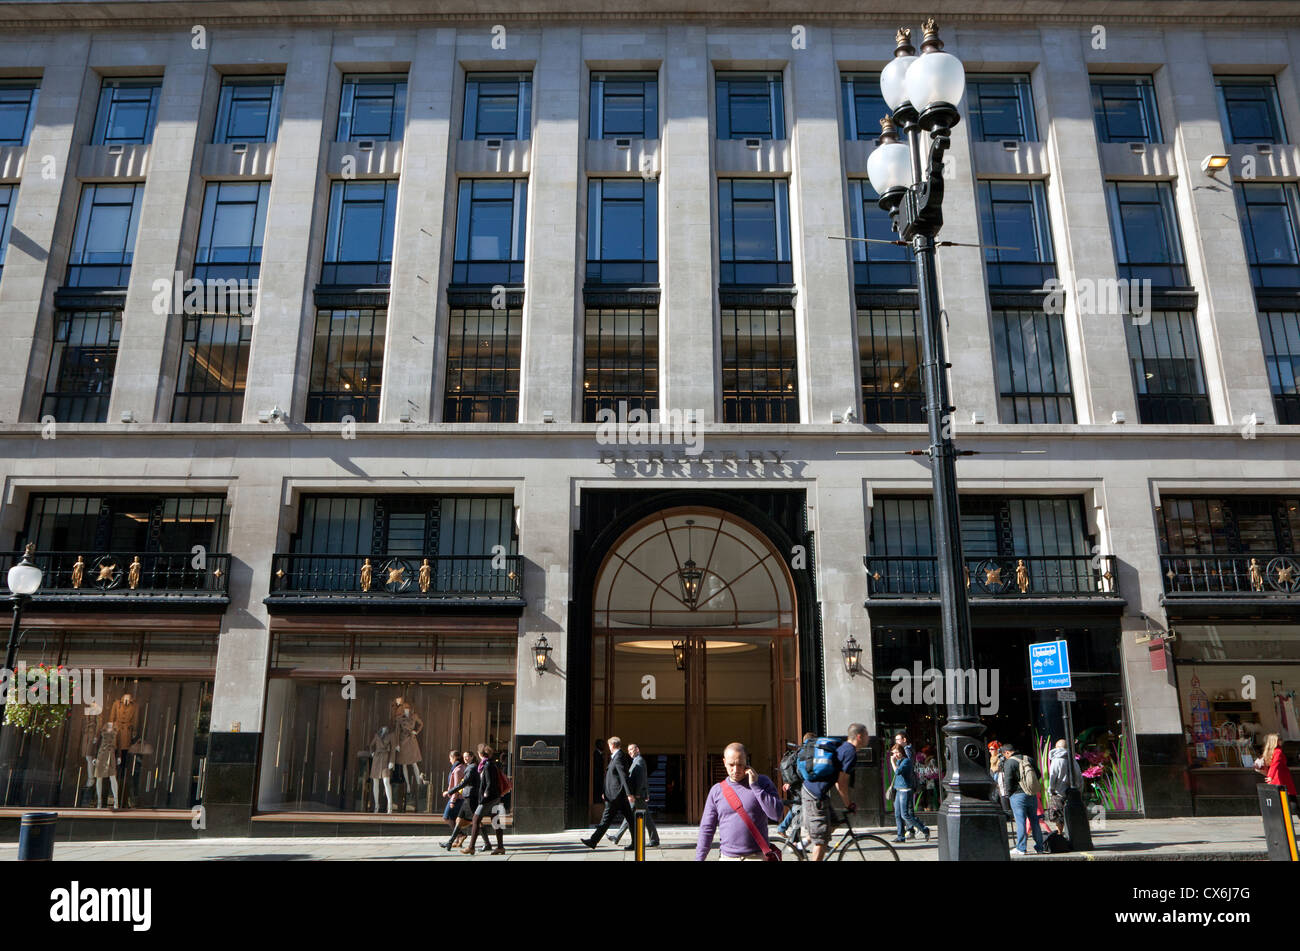 burberry flagship store